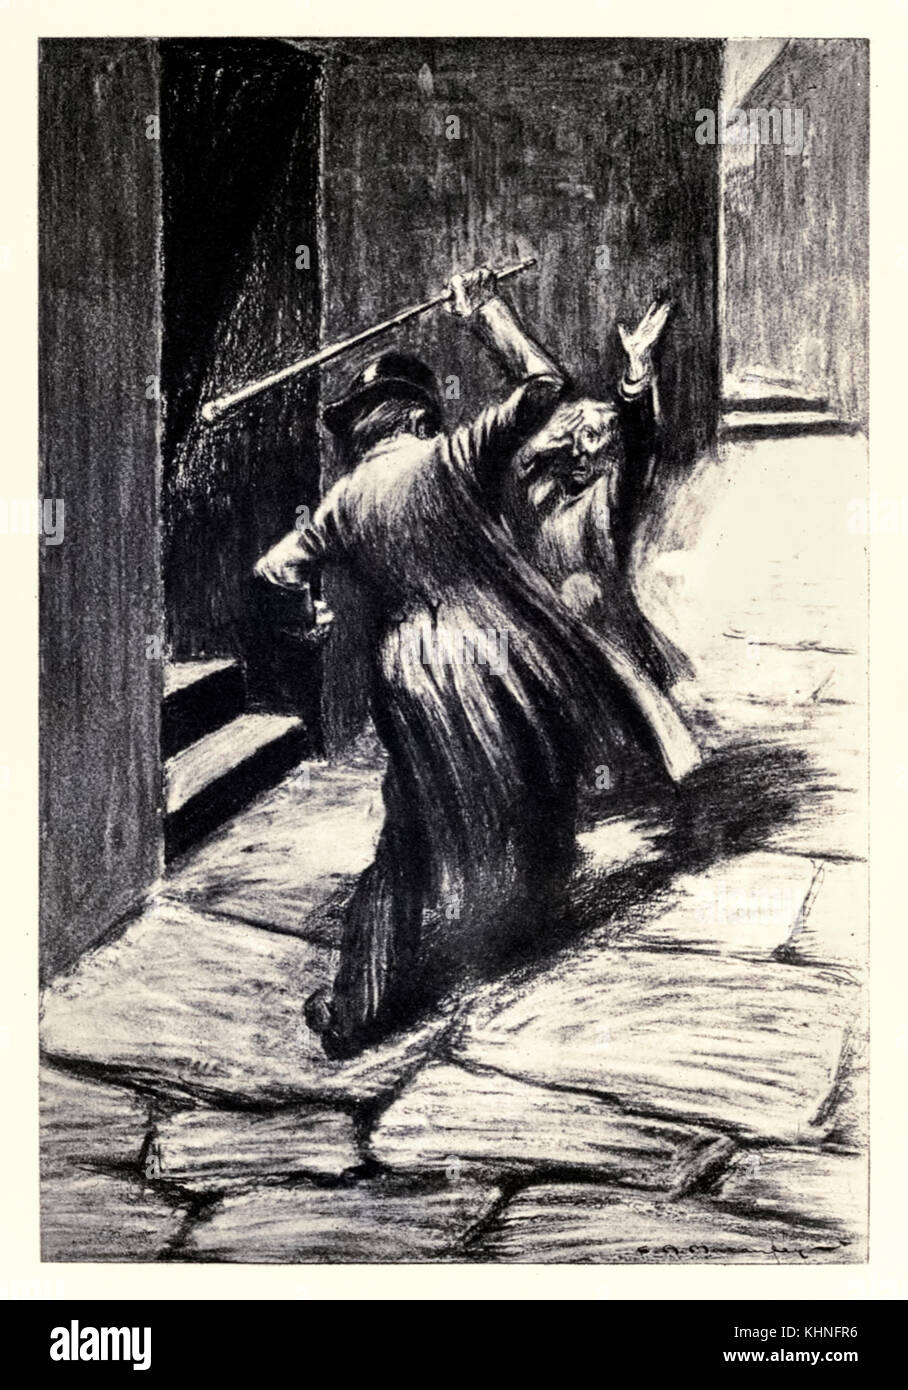 ‘Clubbed him to the earth’ from the ‘Strange Case of Dr Jekyll and Mr Hyde’ by Robert Louis Stevenson (1850-1894) illustrated by Charles Raymond Macauley (1871-1934). Mr Hyde beats to death Sir Danvers Carew M.P.. See more information below. Stock Photo